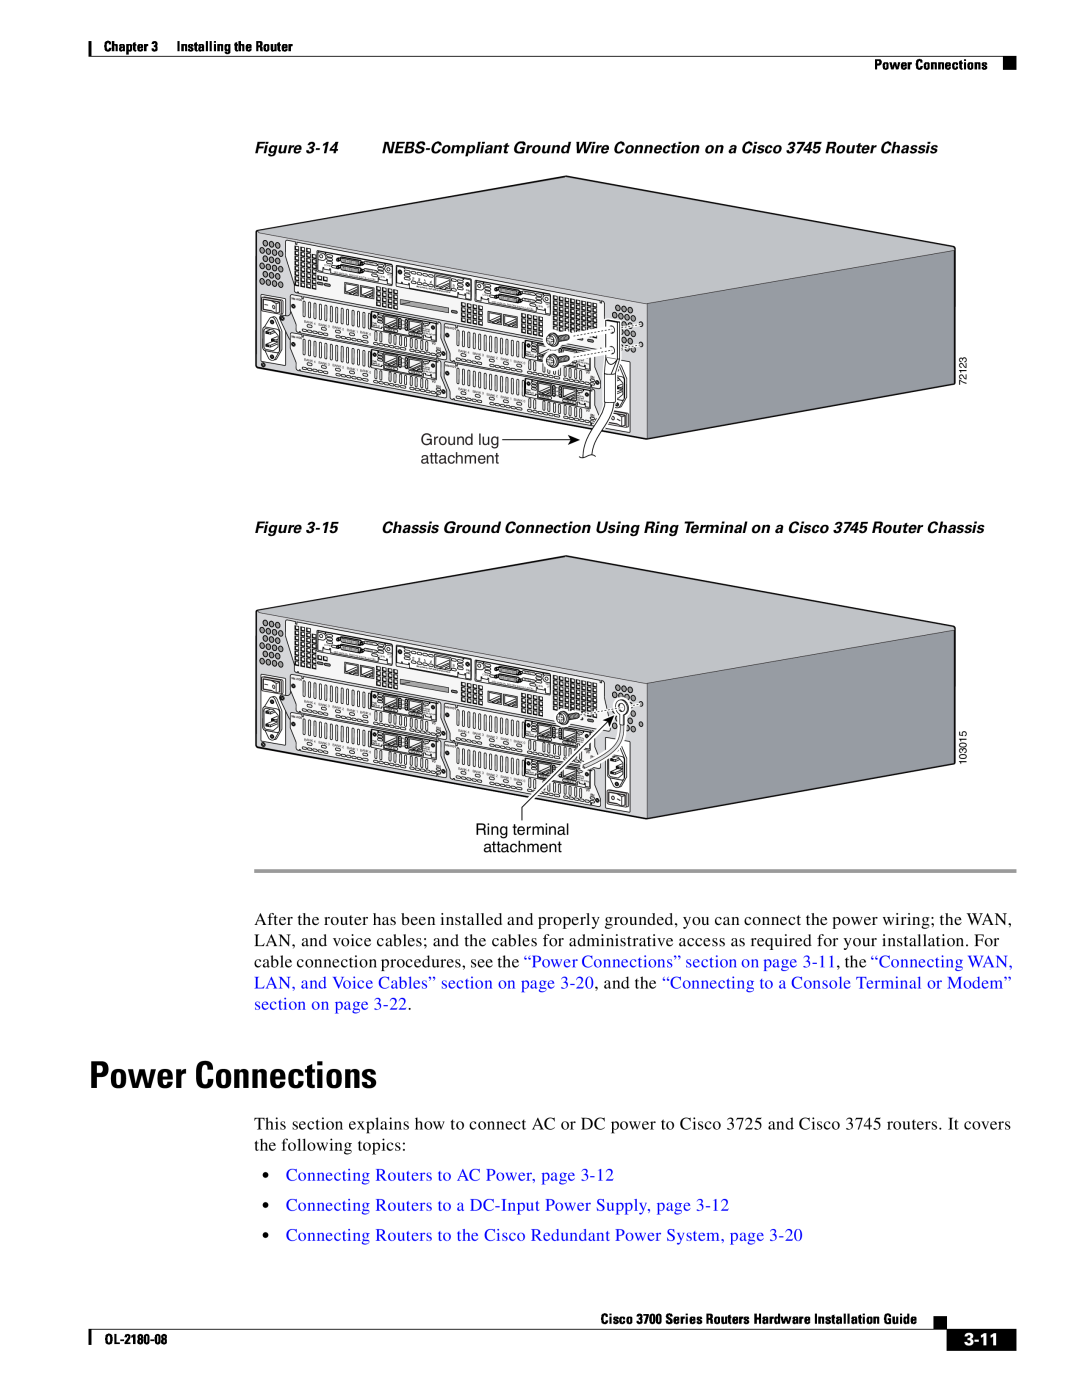 Cisco Systems 3700 Series manual Power Connections, Connecting Routers to AC Power, page, 3-11 